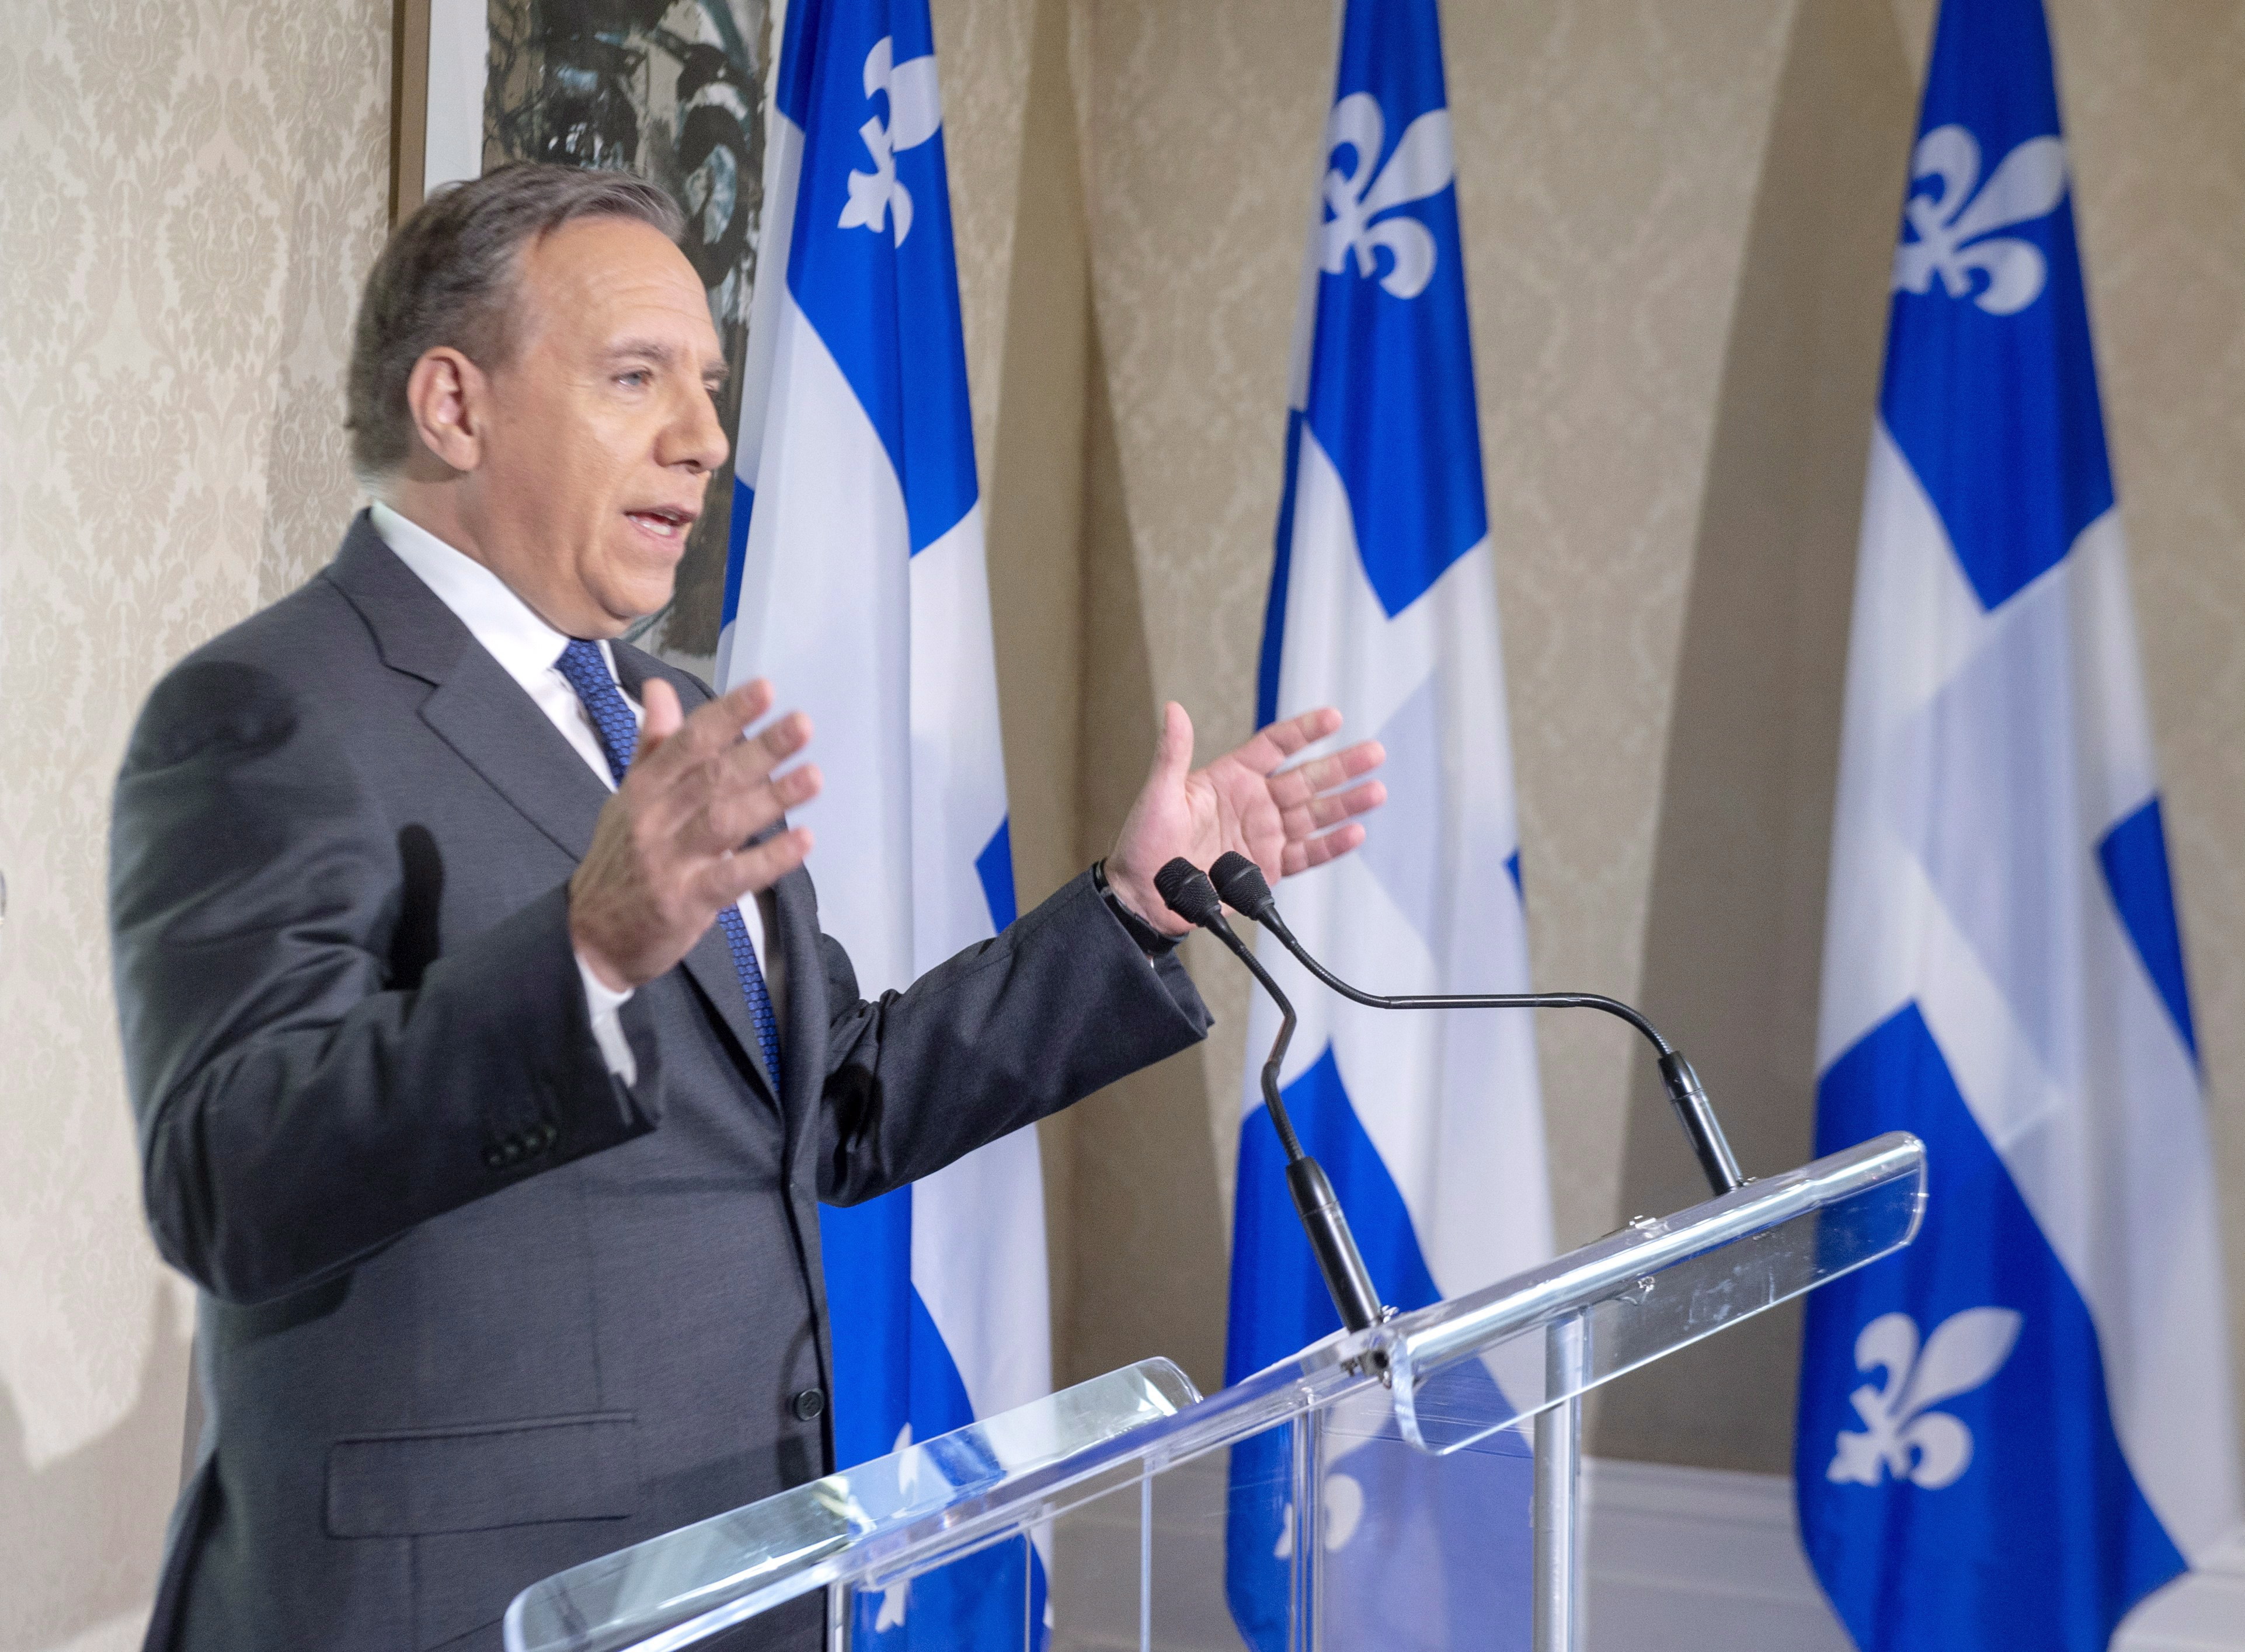 Quebec's Premier designate remains firm on controversial promises after historic win